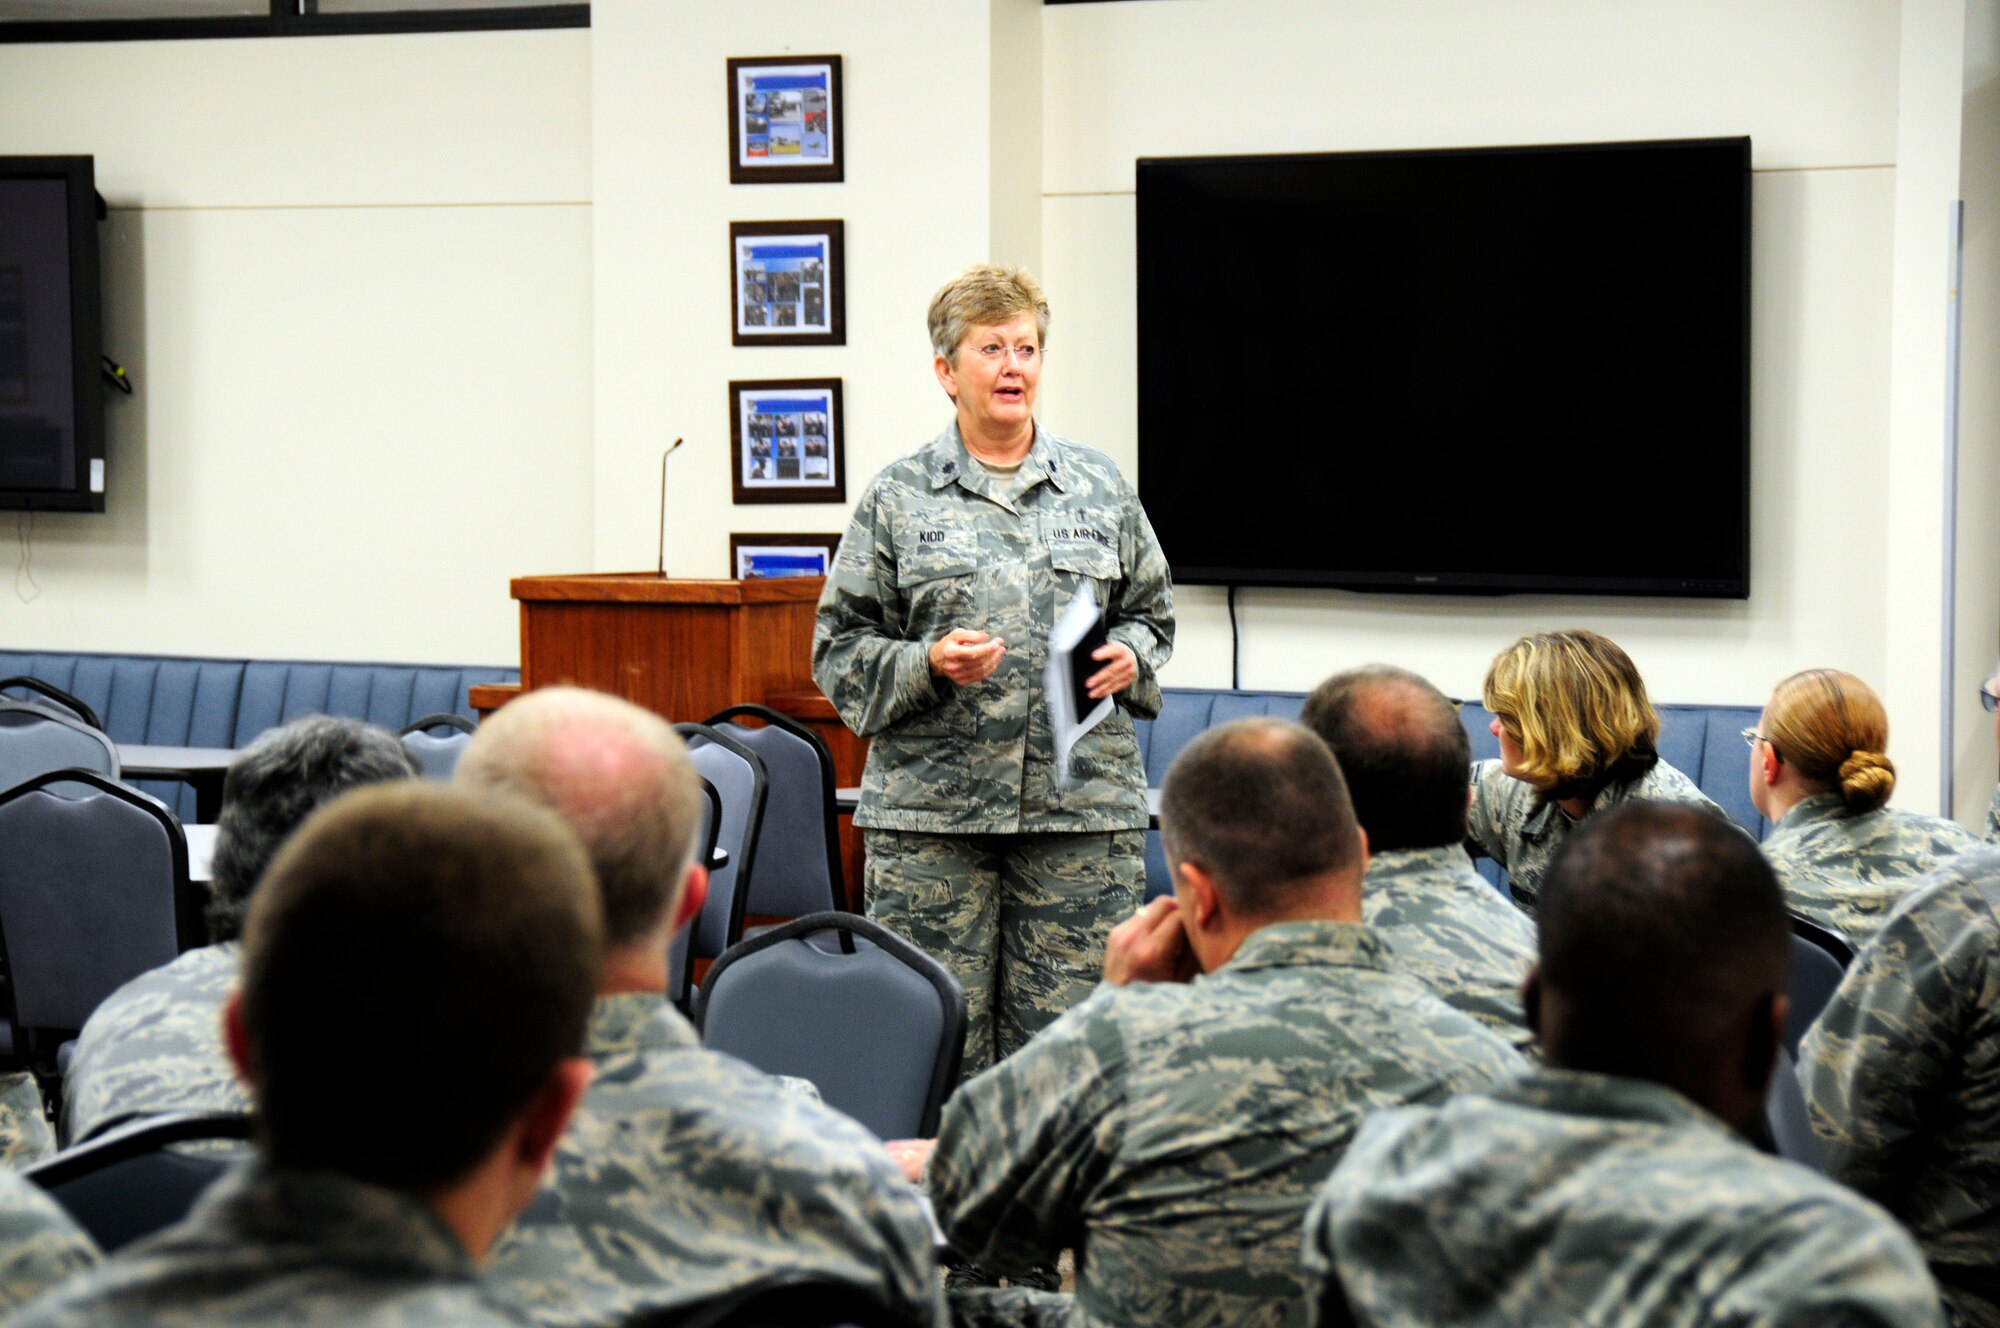 U.S. Air Force Chaplain (Lt. Col.) Debra Kidd, 145th Airlift Wing, shares thoughts, prayer and gives encouragement during a 9/11 remembrance service held at the North Carolina Air National Guard Base, Charlotte Douglas International Airport, Sept 11, 2015. Time was taken for reflection during a moment of silence to honor and remember those who lost their lives, 14 years ago today. (U.S. Air National Guard photo by Master Sgt. Patricia F. Moran, 145th Public Affairs/Released)